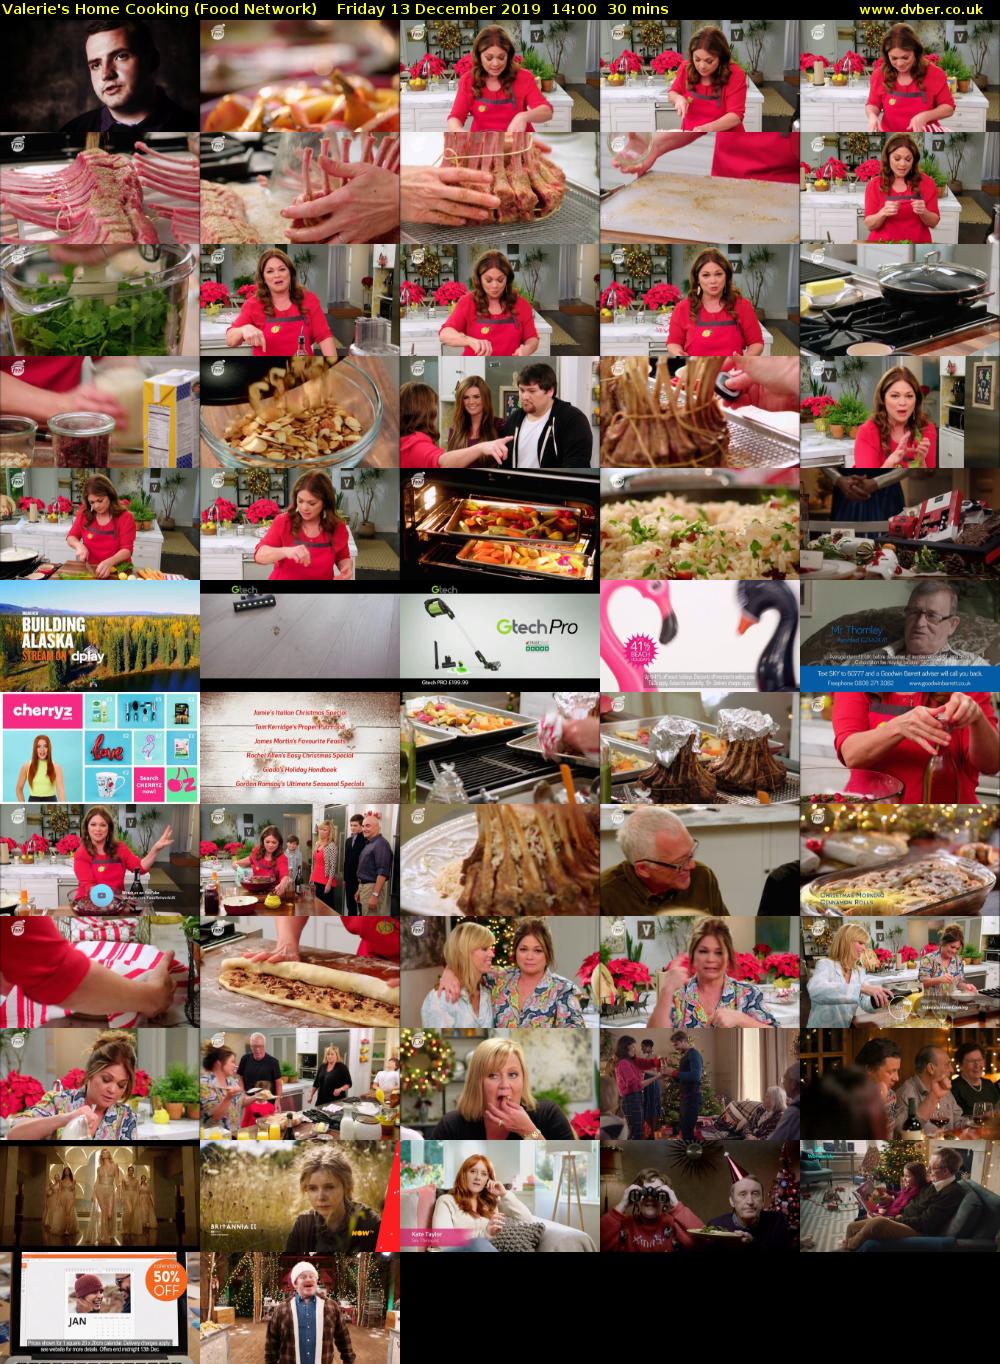 Valerie's Home Cooking (Food Network) Friday 13 December 2019 14:00 - 14:30